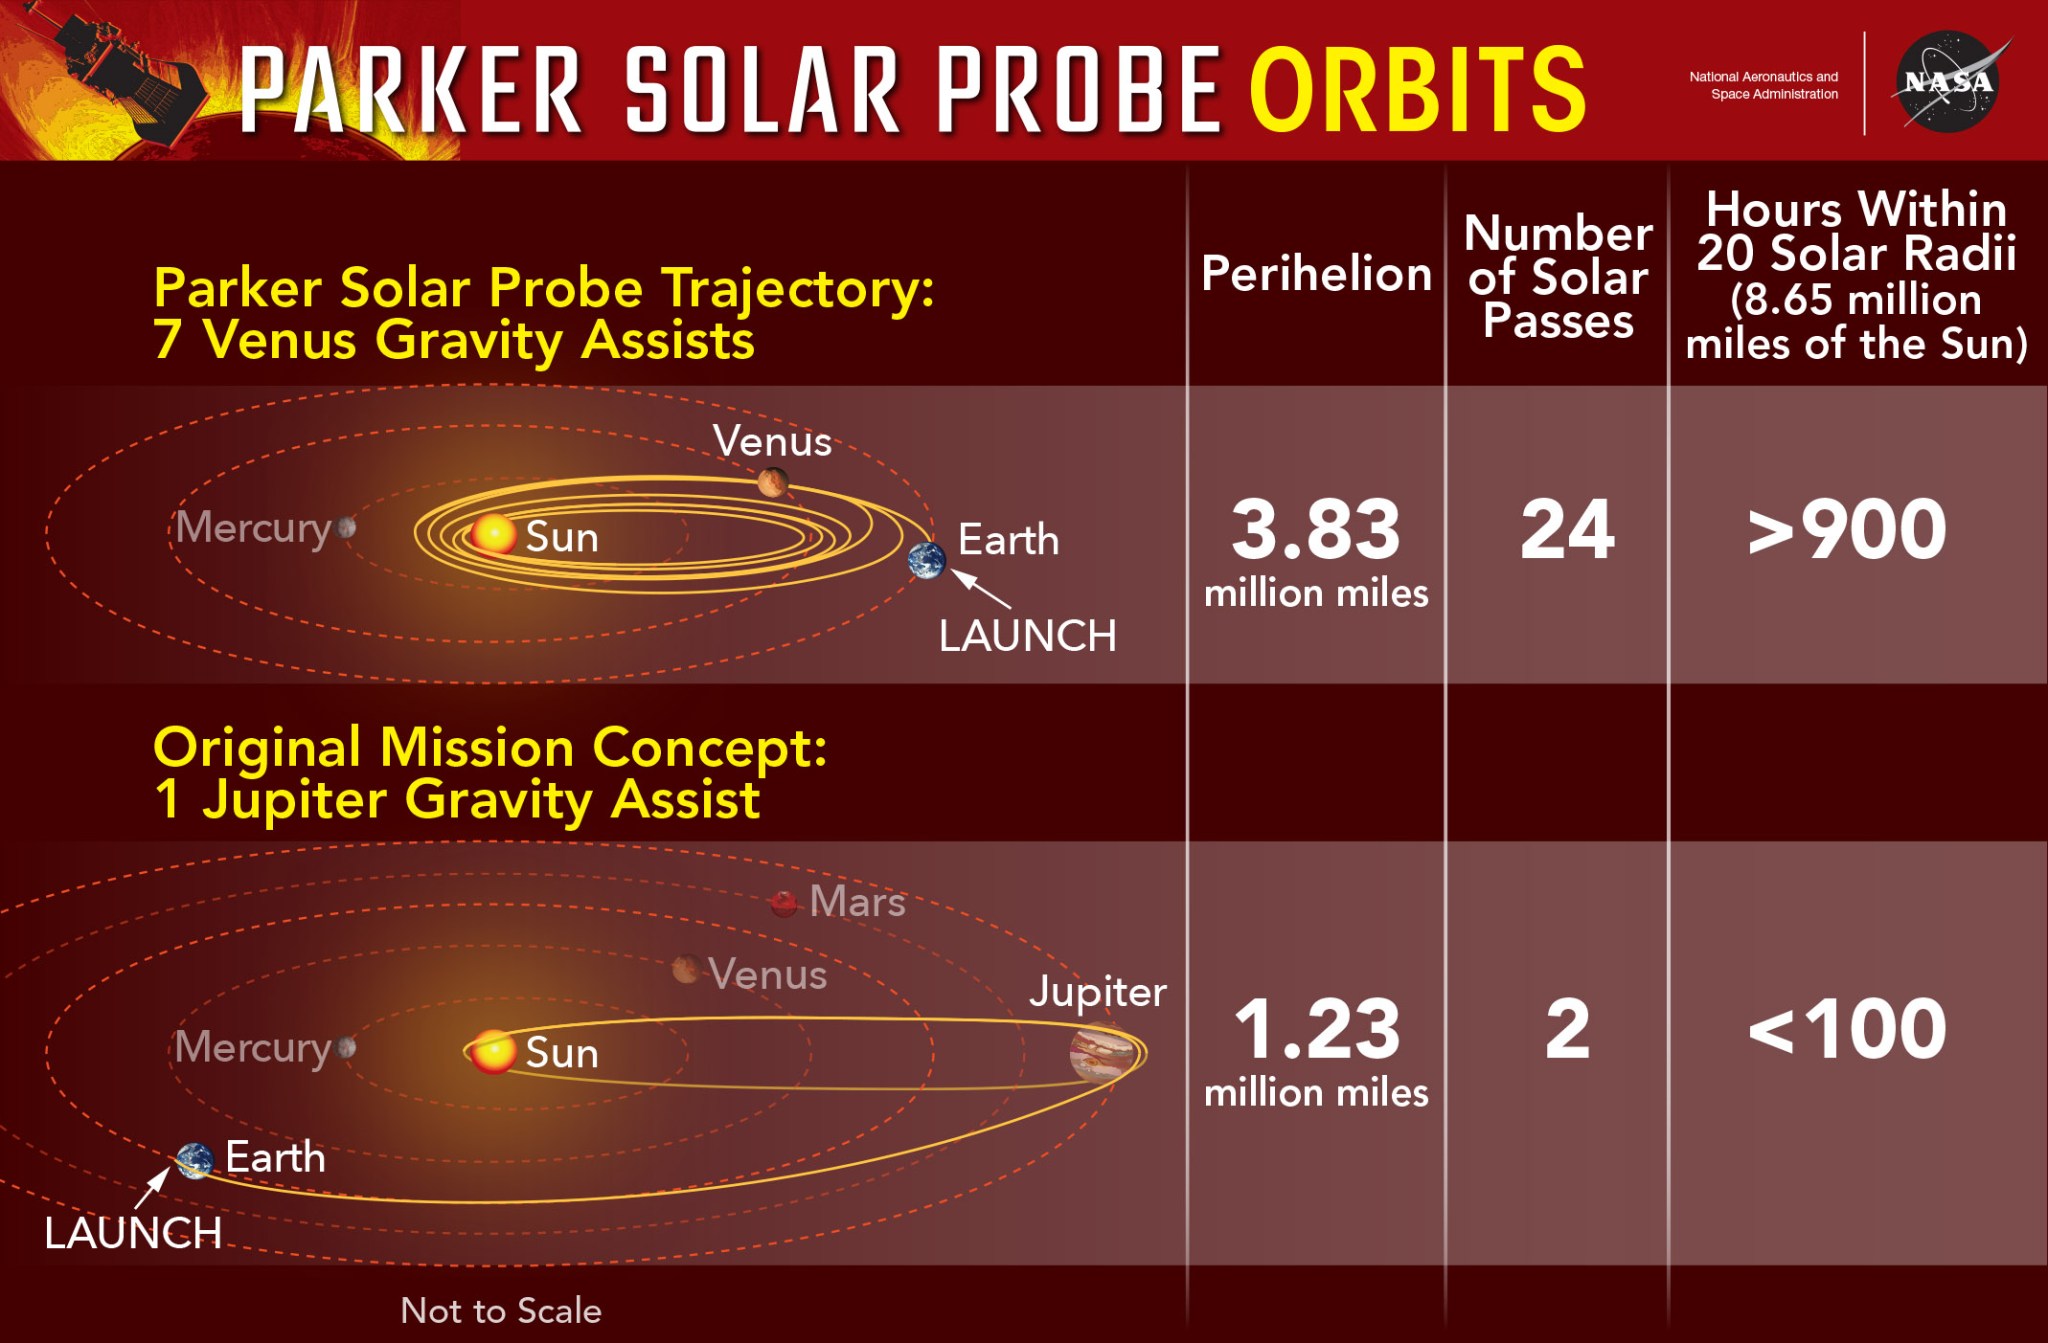 Infographic comparing Parker Solar Probe orbital trajectory concepts. The 7 Venus gravity assists show Perihelion at 3.83 millions miles, the number of Solar Passes as 24, and the Hours with 20 Solar Radii as less than 900. The original mission concept, with 1 Jupiter gravity assist would have had Perihelion at 1.23 million miles, 2 solar passes, and greater than 100 hours within 20 solar radii.